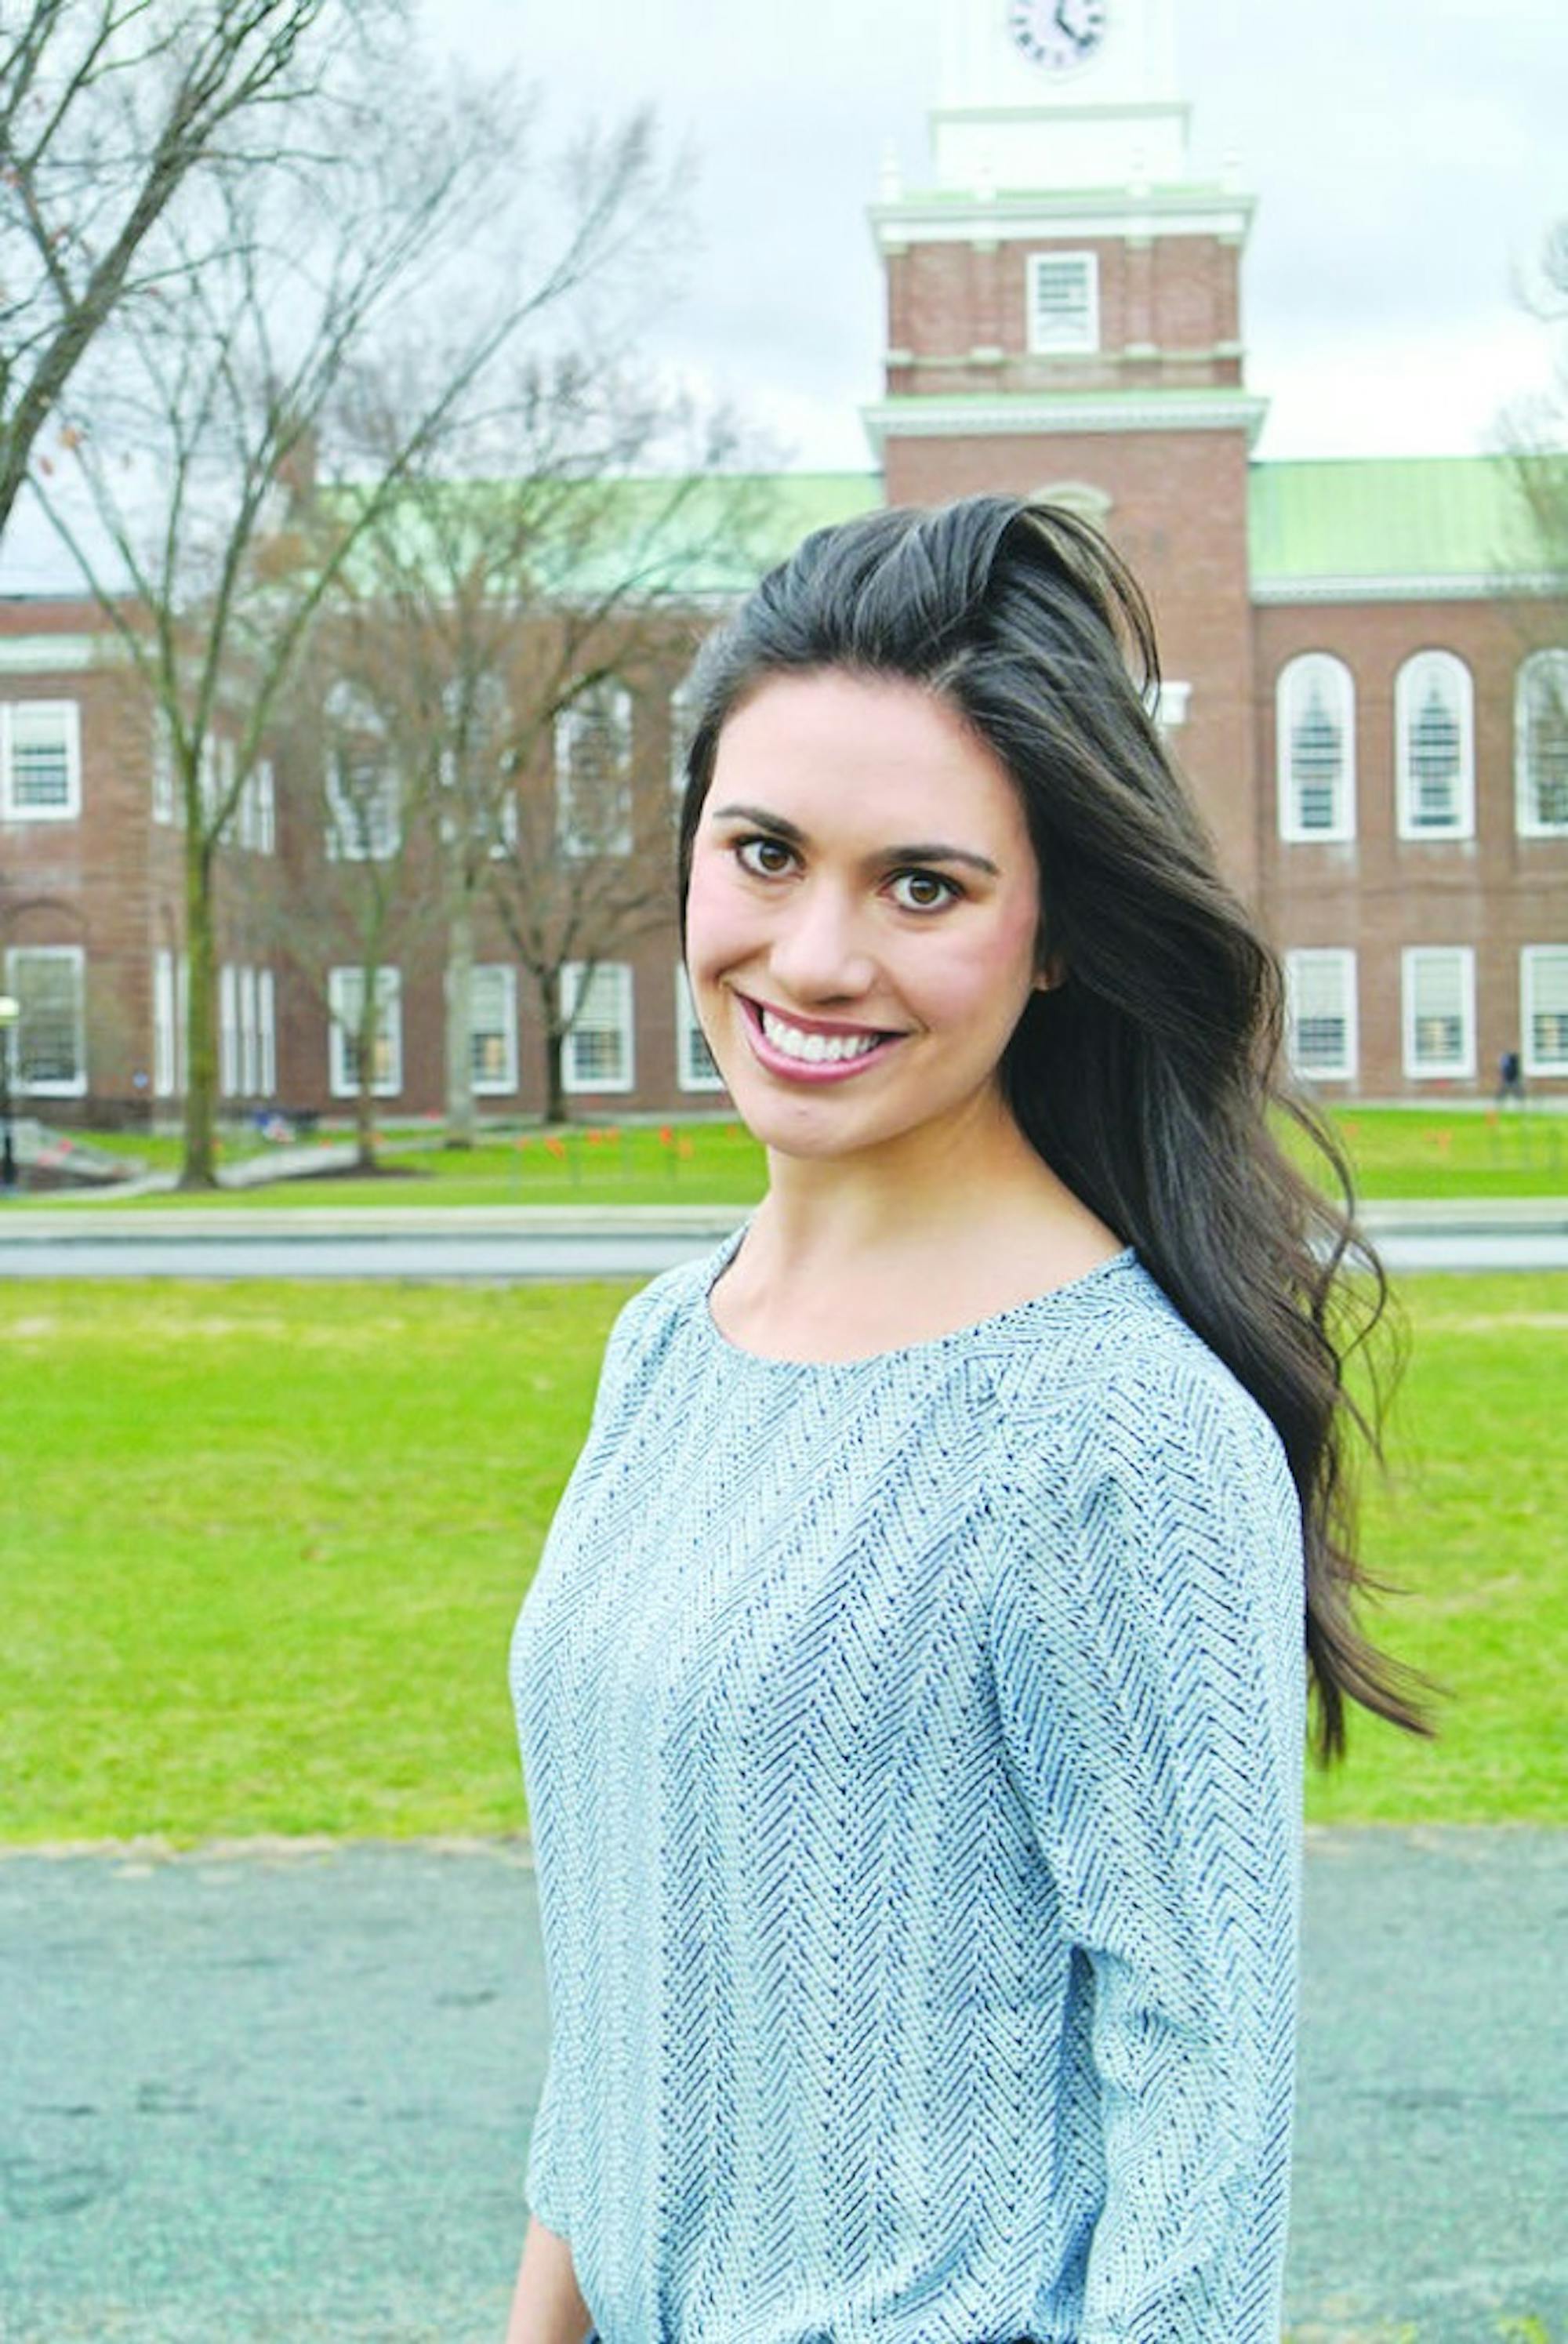 Lindsay MacMillan '16 reflects on the lessons that she's learned from female friendships throughout her time at Dartmouth.